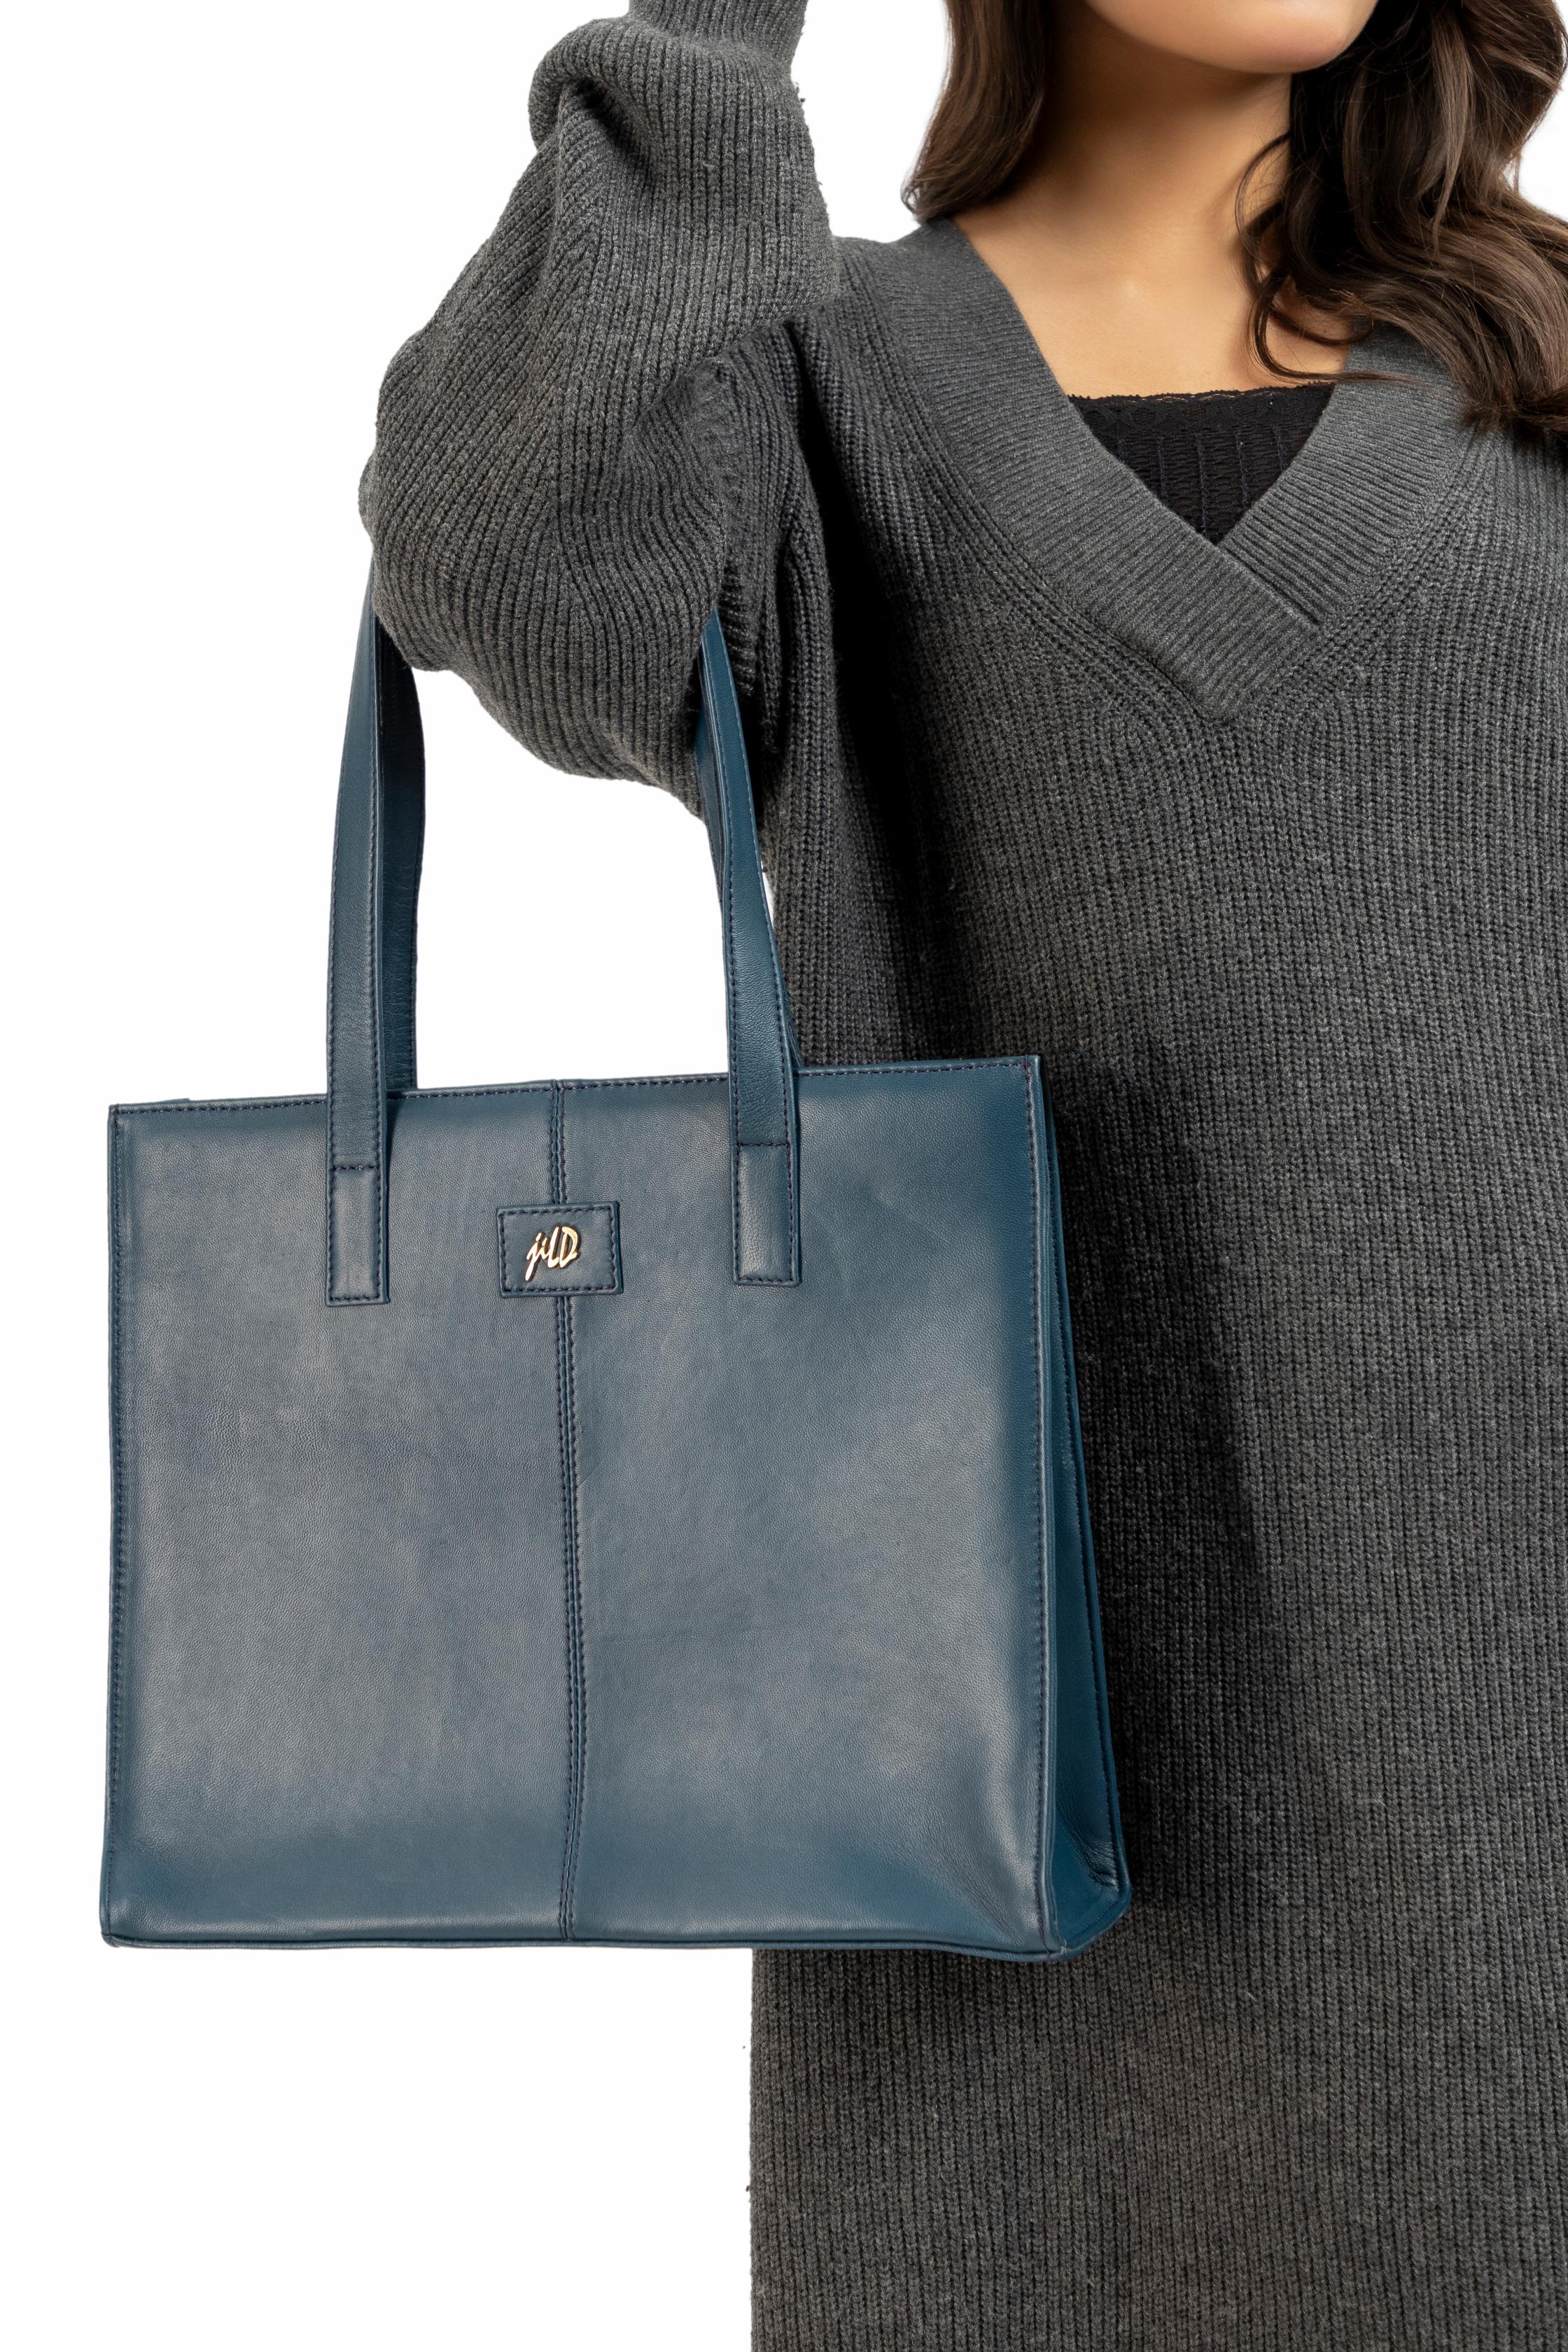 Everyday Women's Leather  Zipper Tote Bag-Midnight Blue